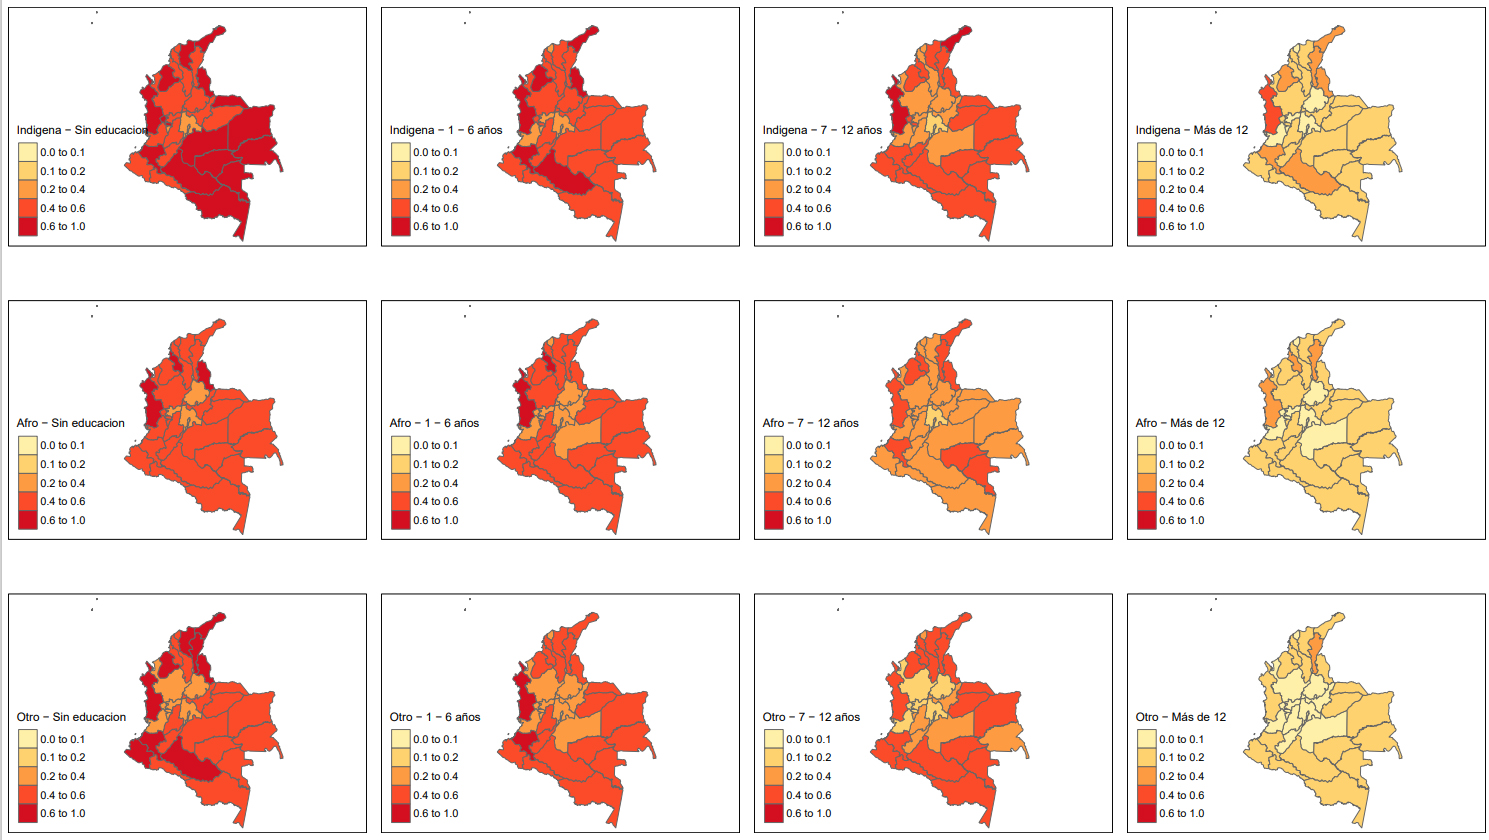 SAE estimate of the poverty incidence rate in Colombia for the year 2018 disaggregated by ethnicity and level of education based on the Multilevel Regression with PostStratification approach. Source: Prepared by the authors.